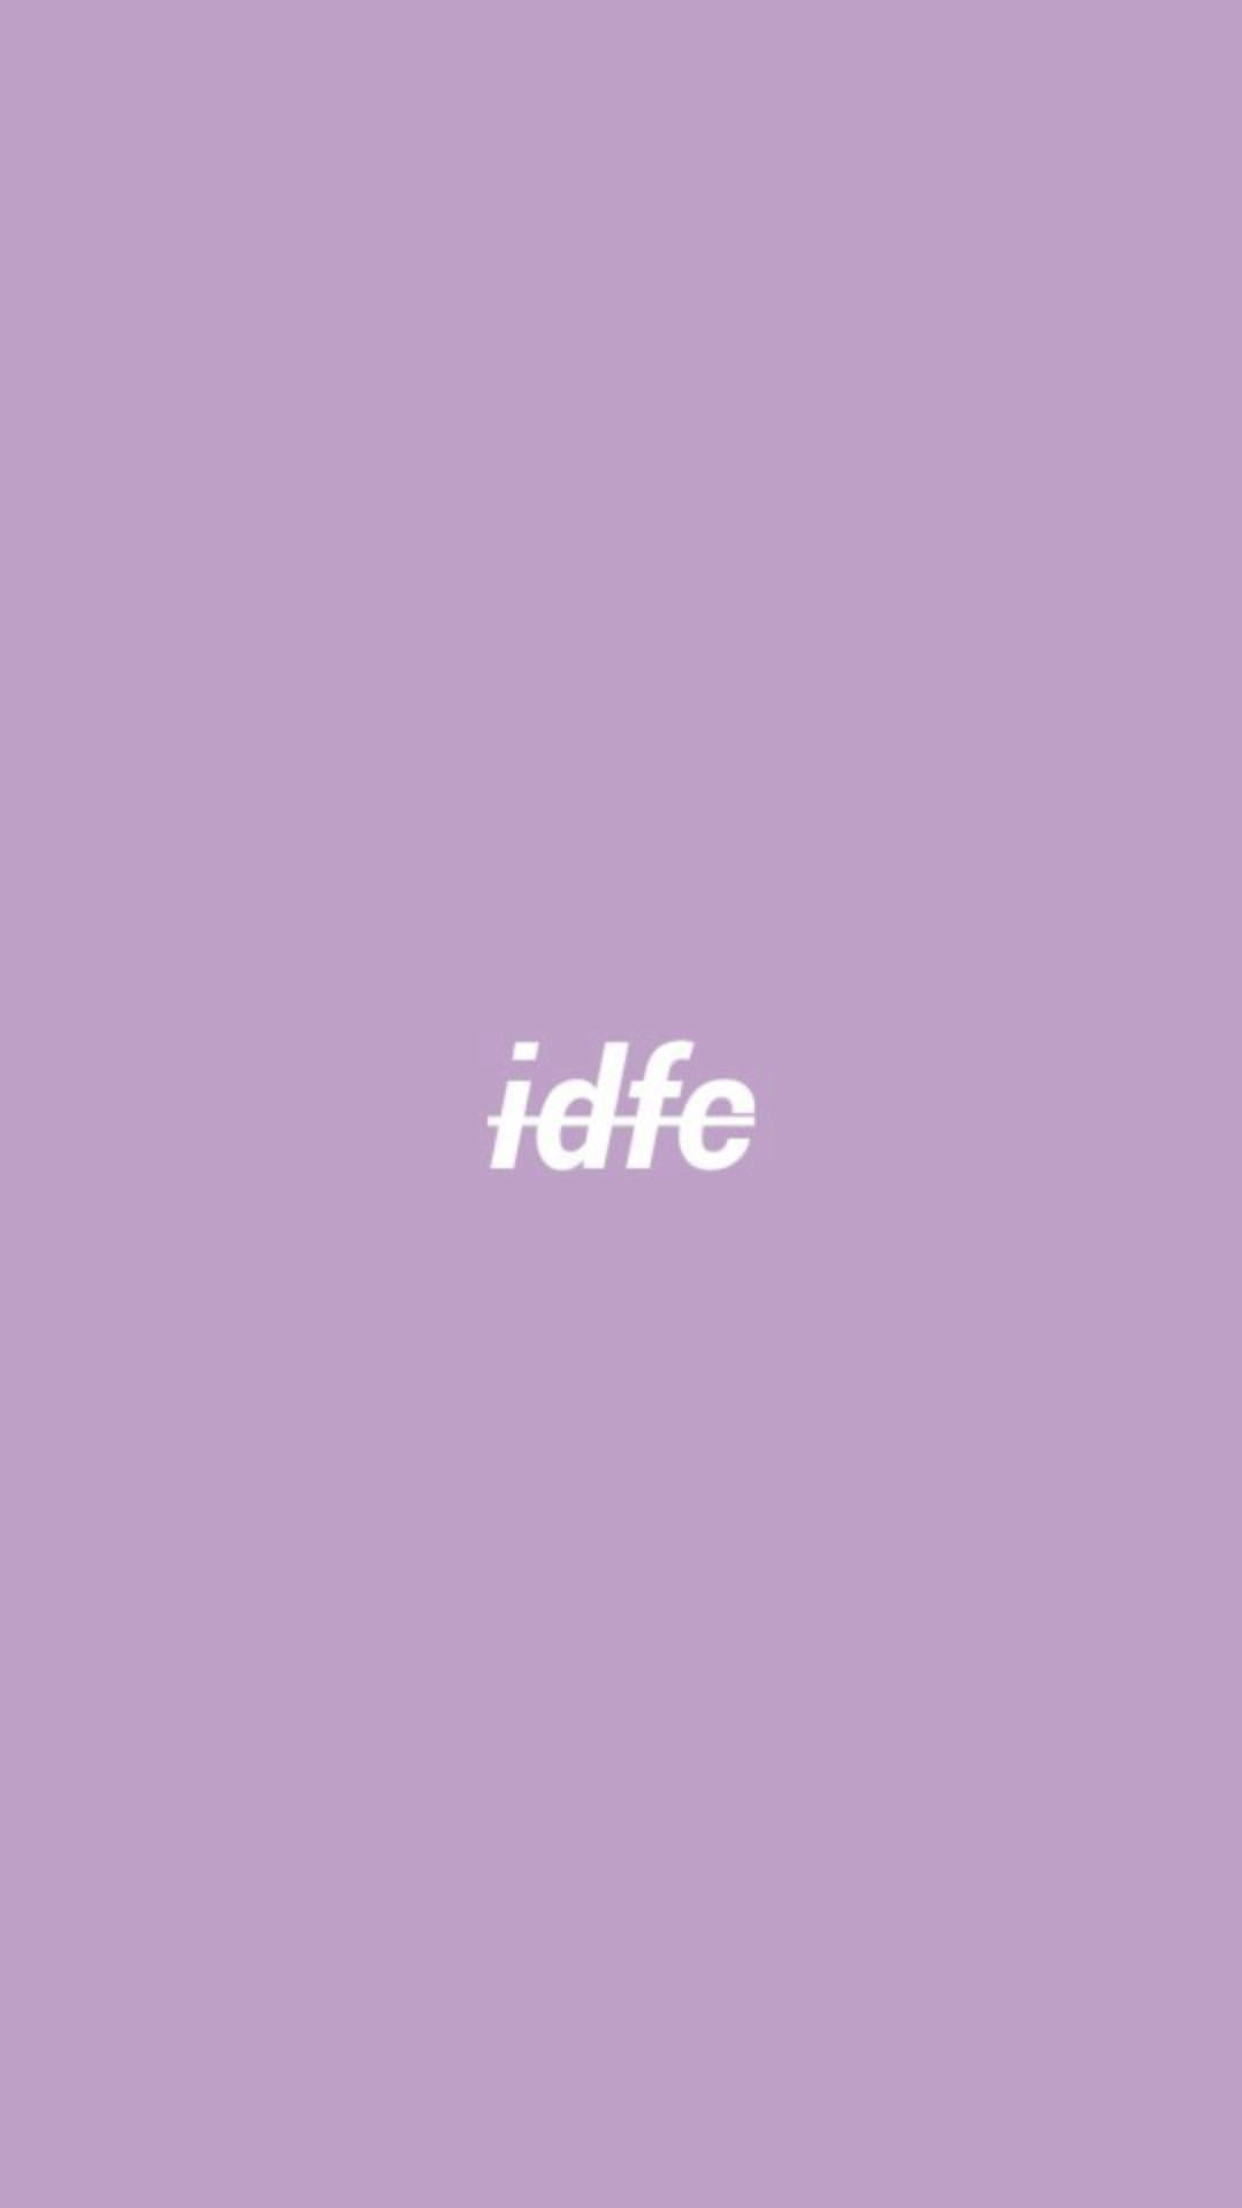 Wallpaper idfc. Aesthetic words, Bff quotes, Aesthetic wallpaper